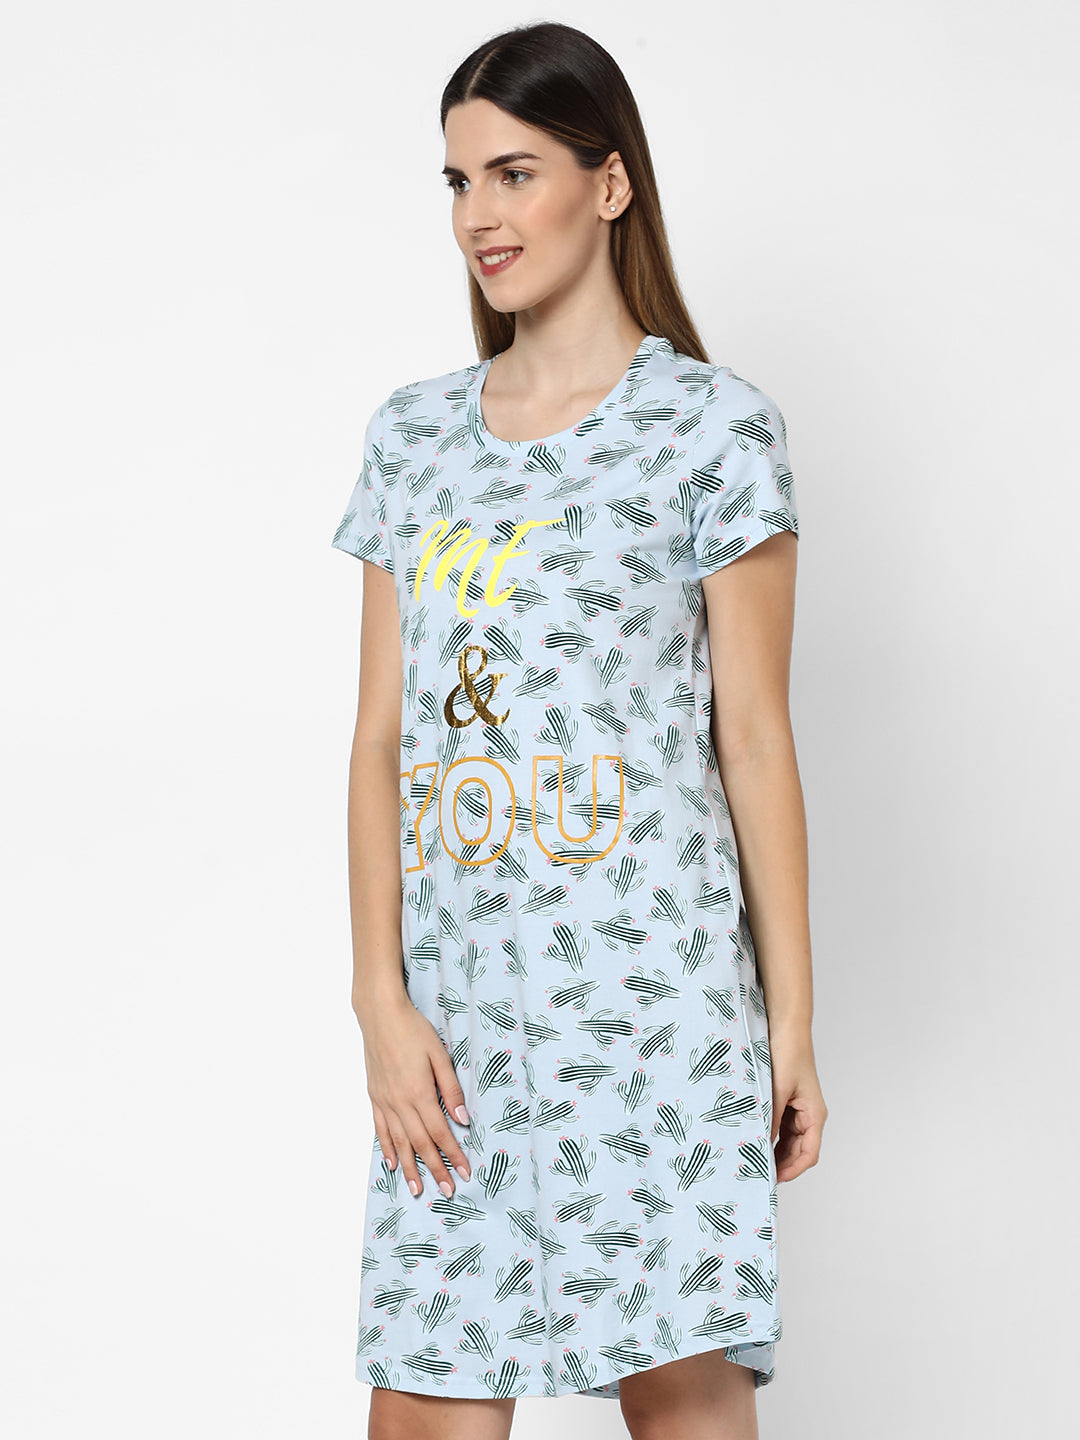 evolove women's cactus print with me and you printed knee length nightgown/short nighty/longpolo, 100% cotton, super soft, trendy design